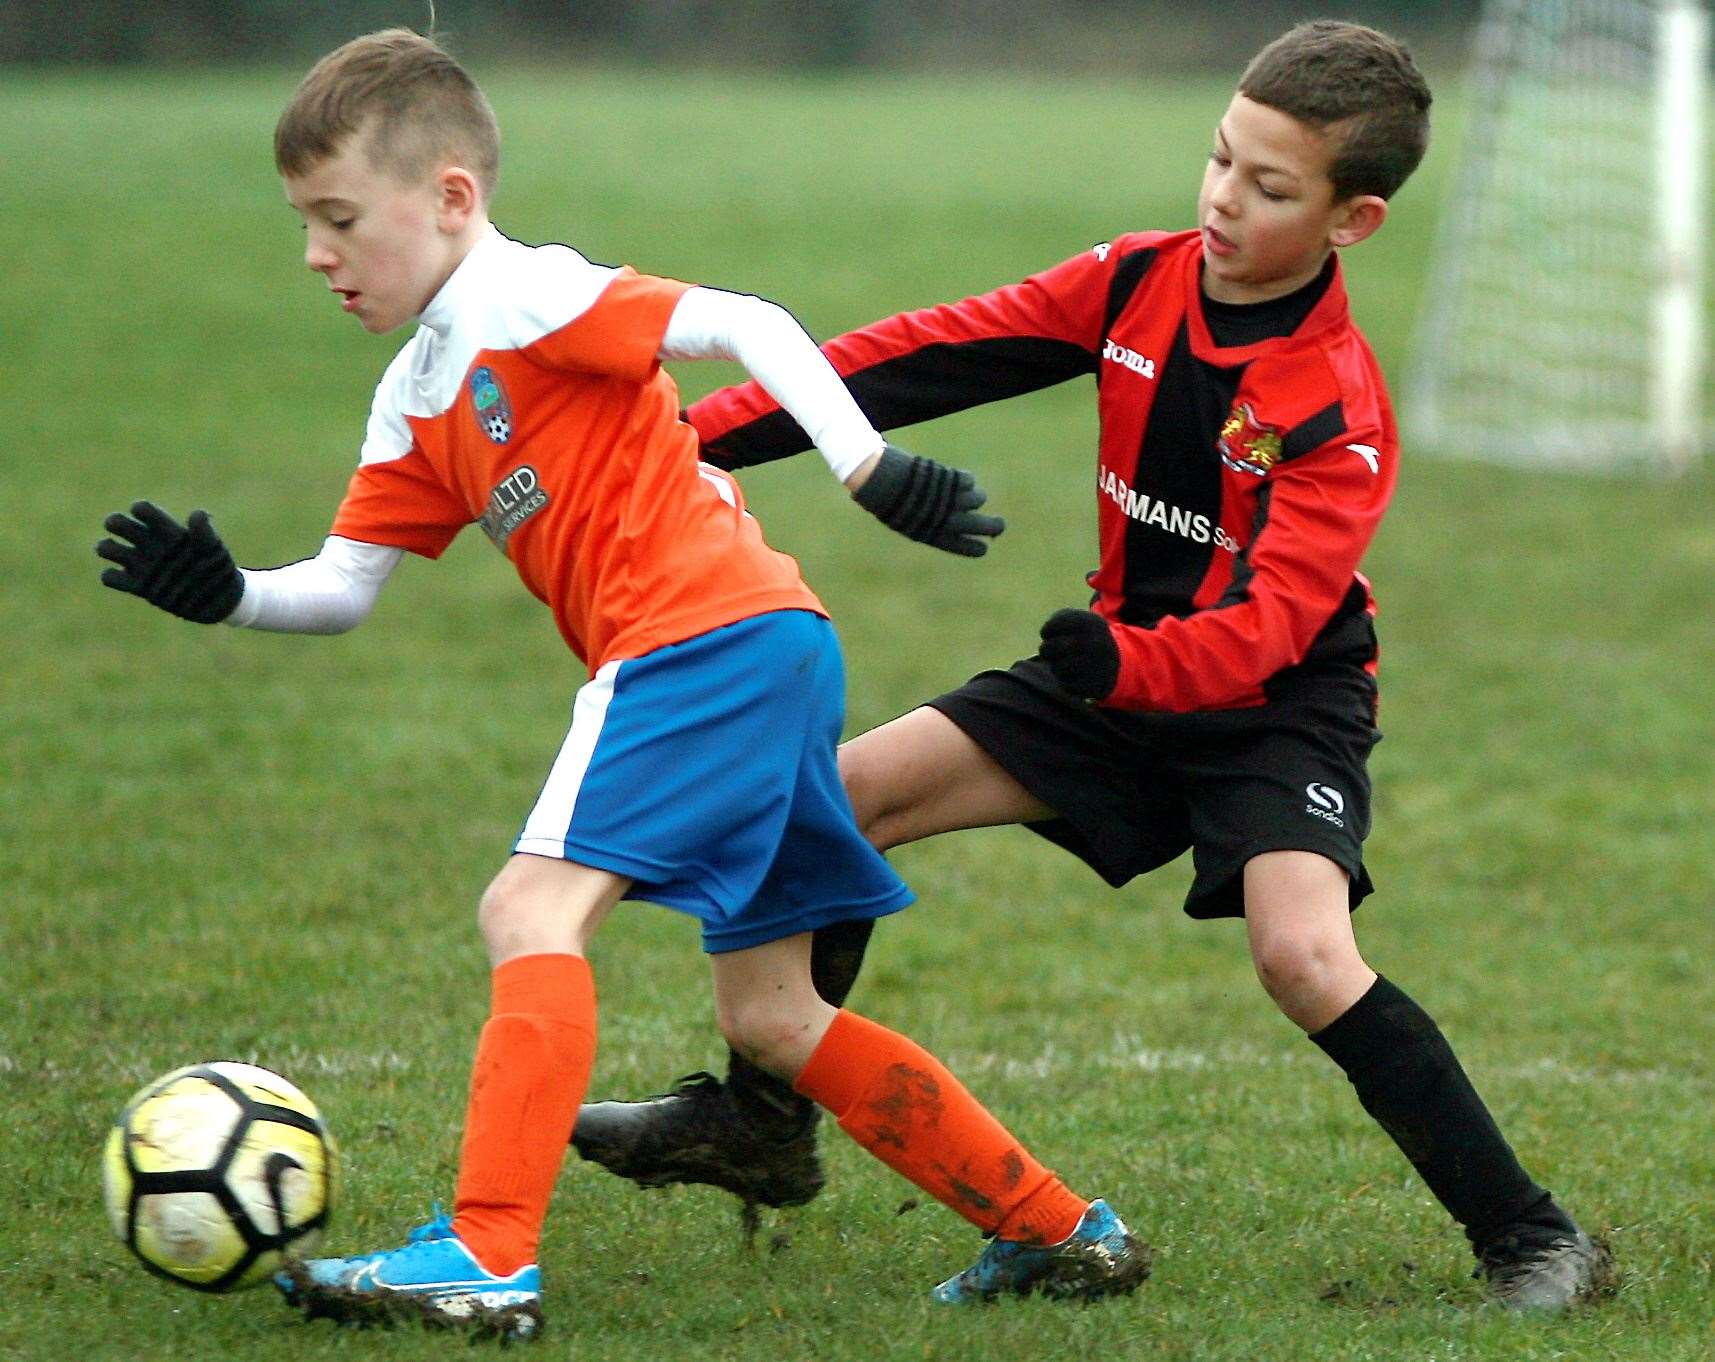 Cuxton 91 Cannons under-8s (orange) on the ball against Woodcoombe Youth under-8s. Picture: Phil Lee FM27663941